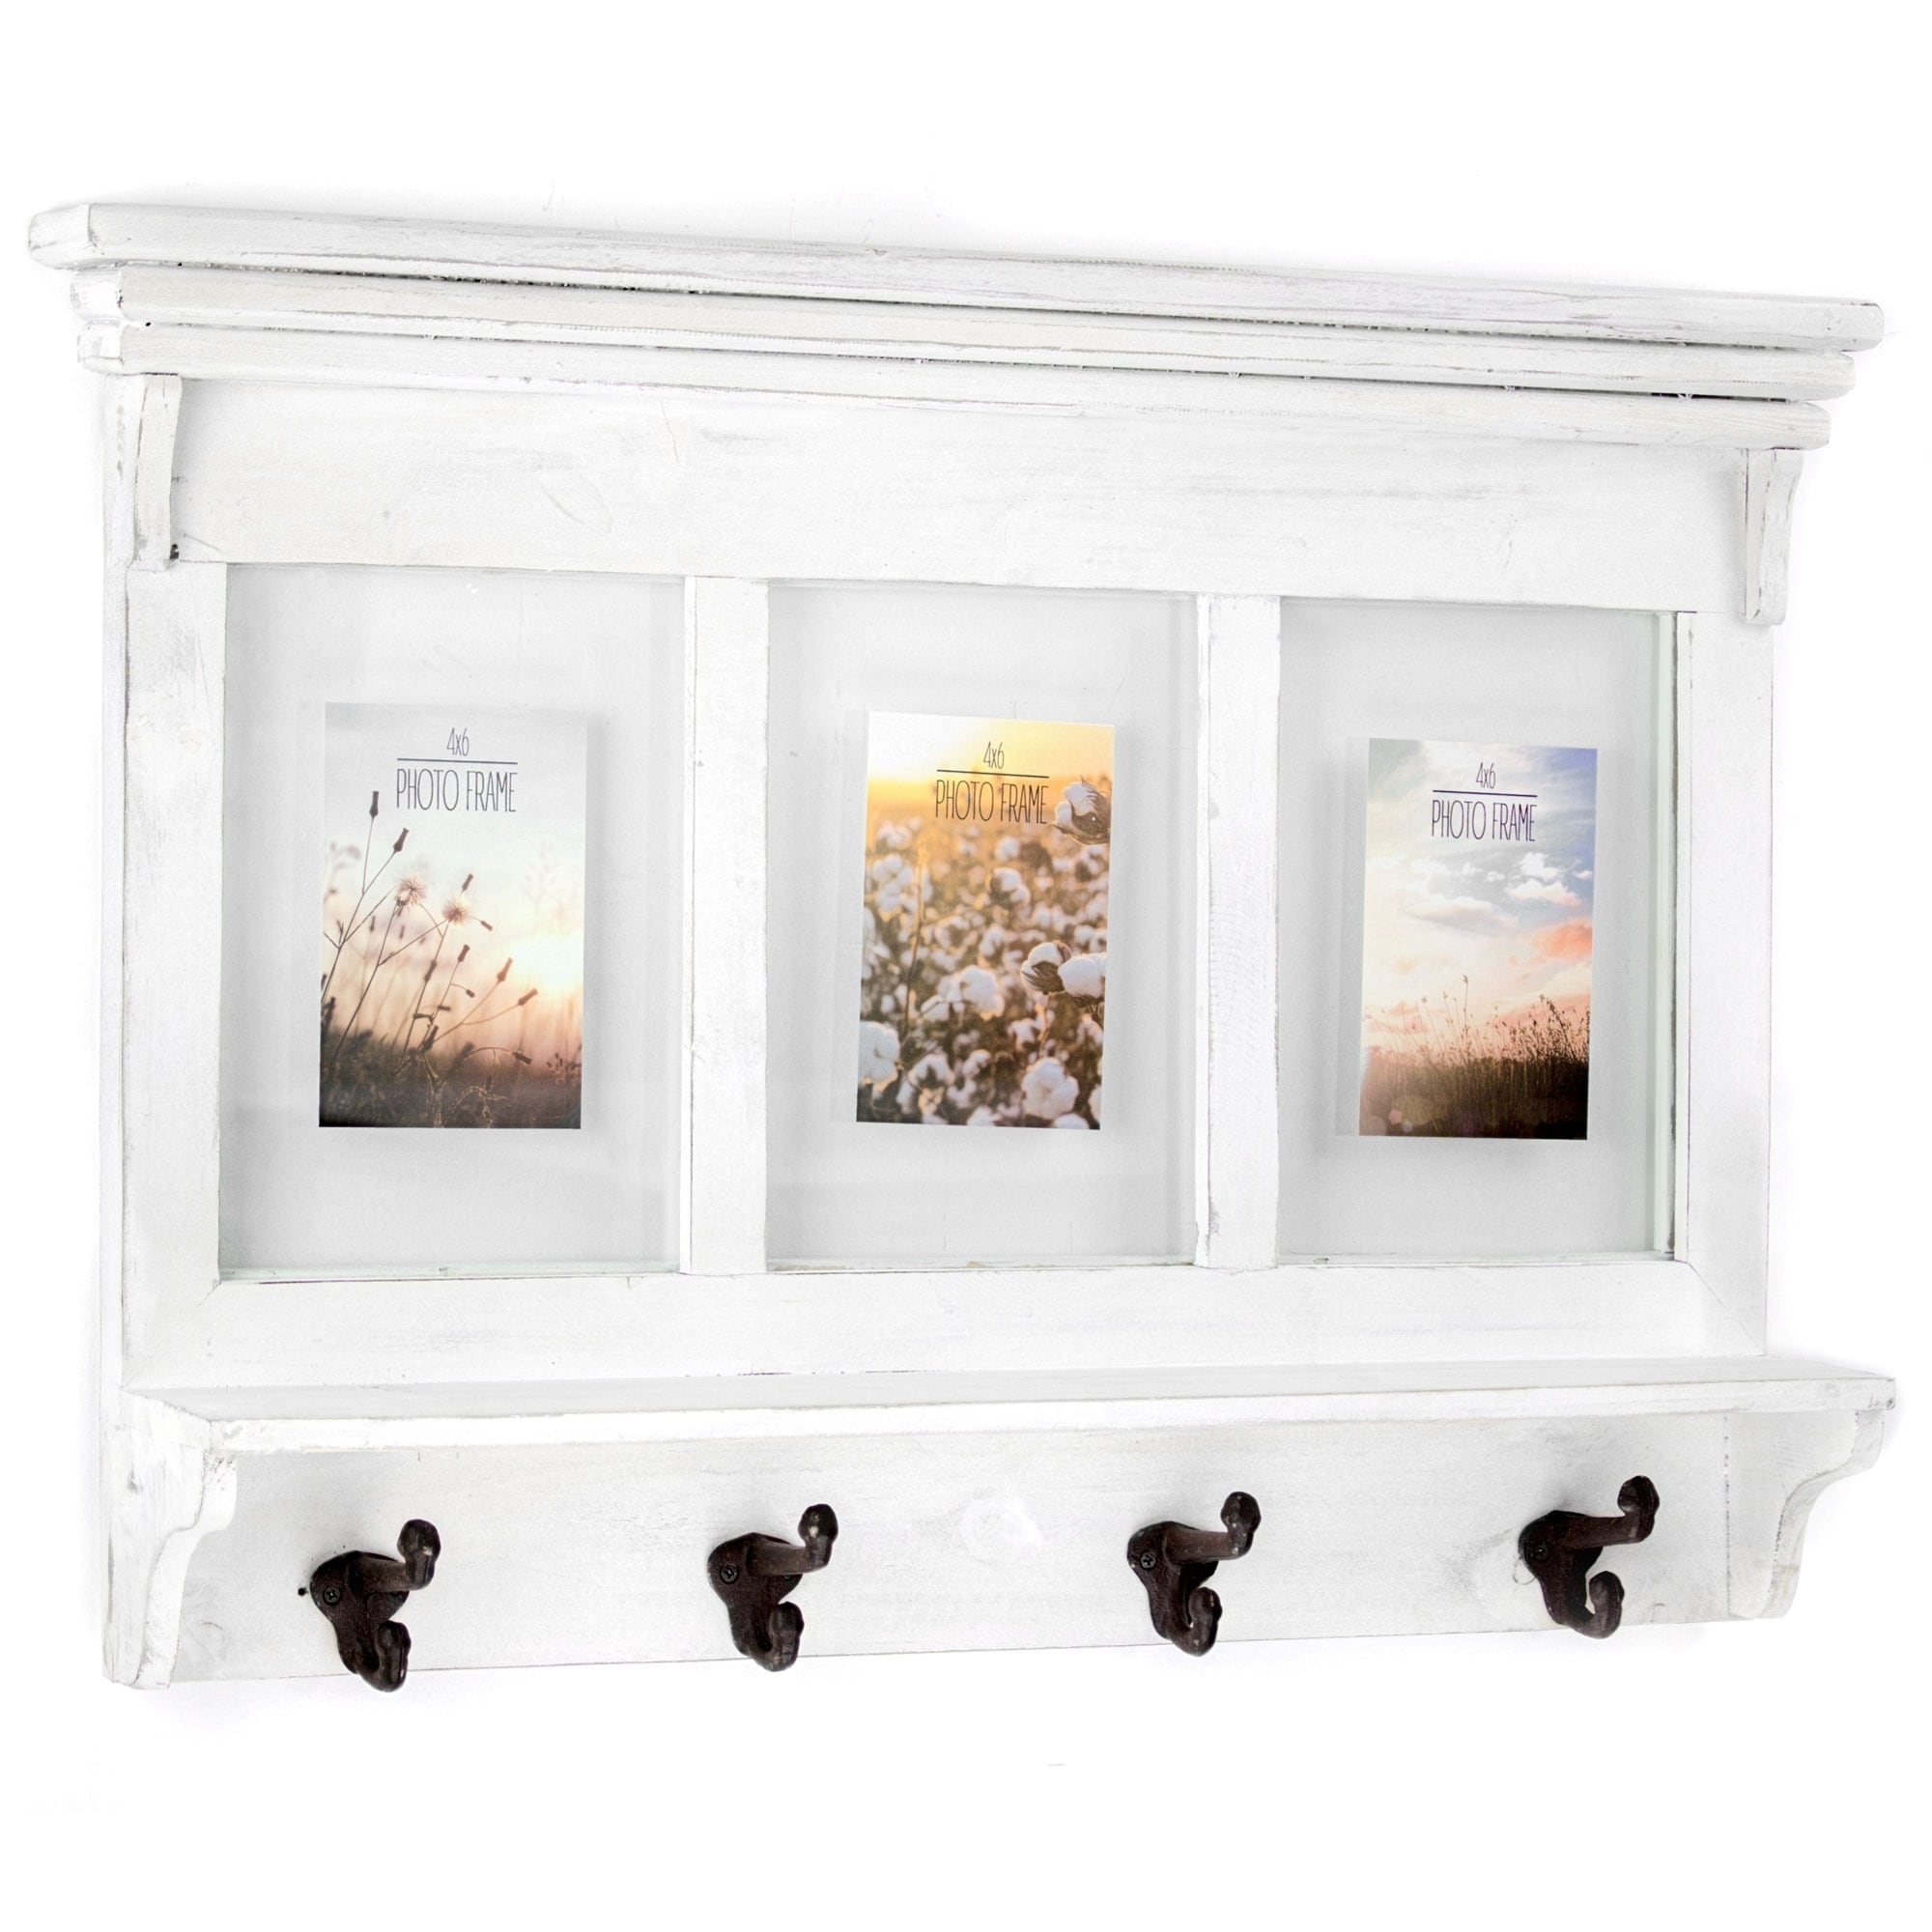 American Art Decor Whitewashed Wood Shelf Coat Rack With Picture Frames Farmhouse Decor Overstock 22851919